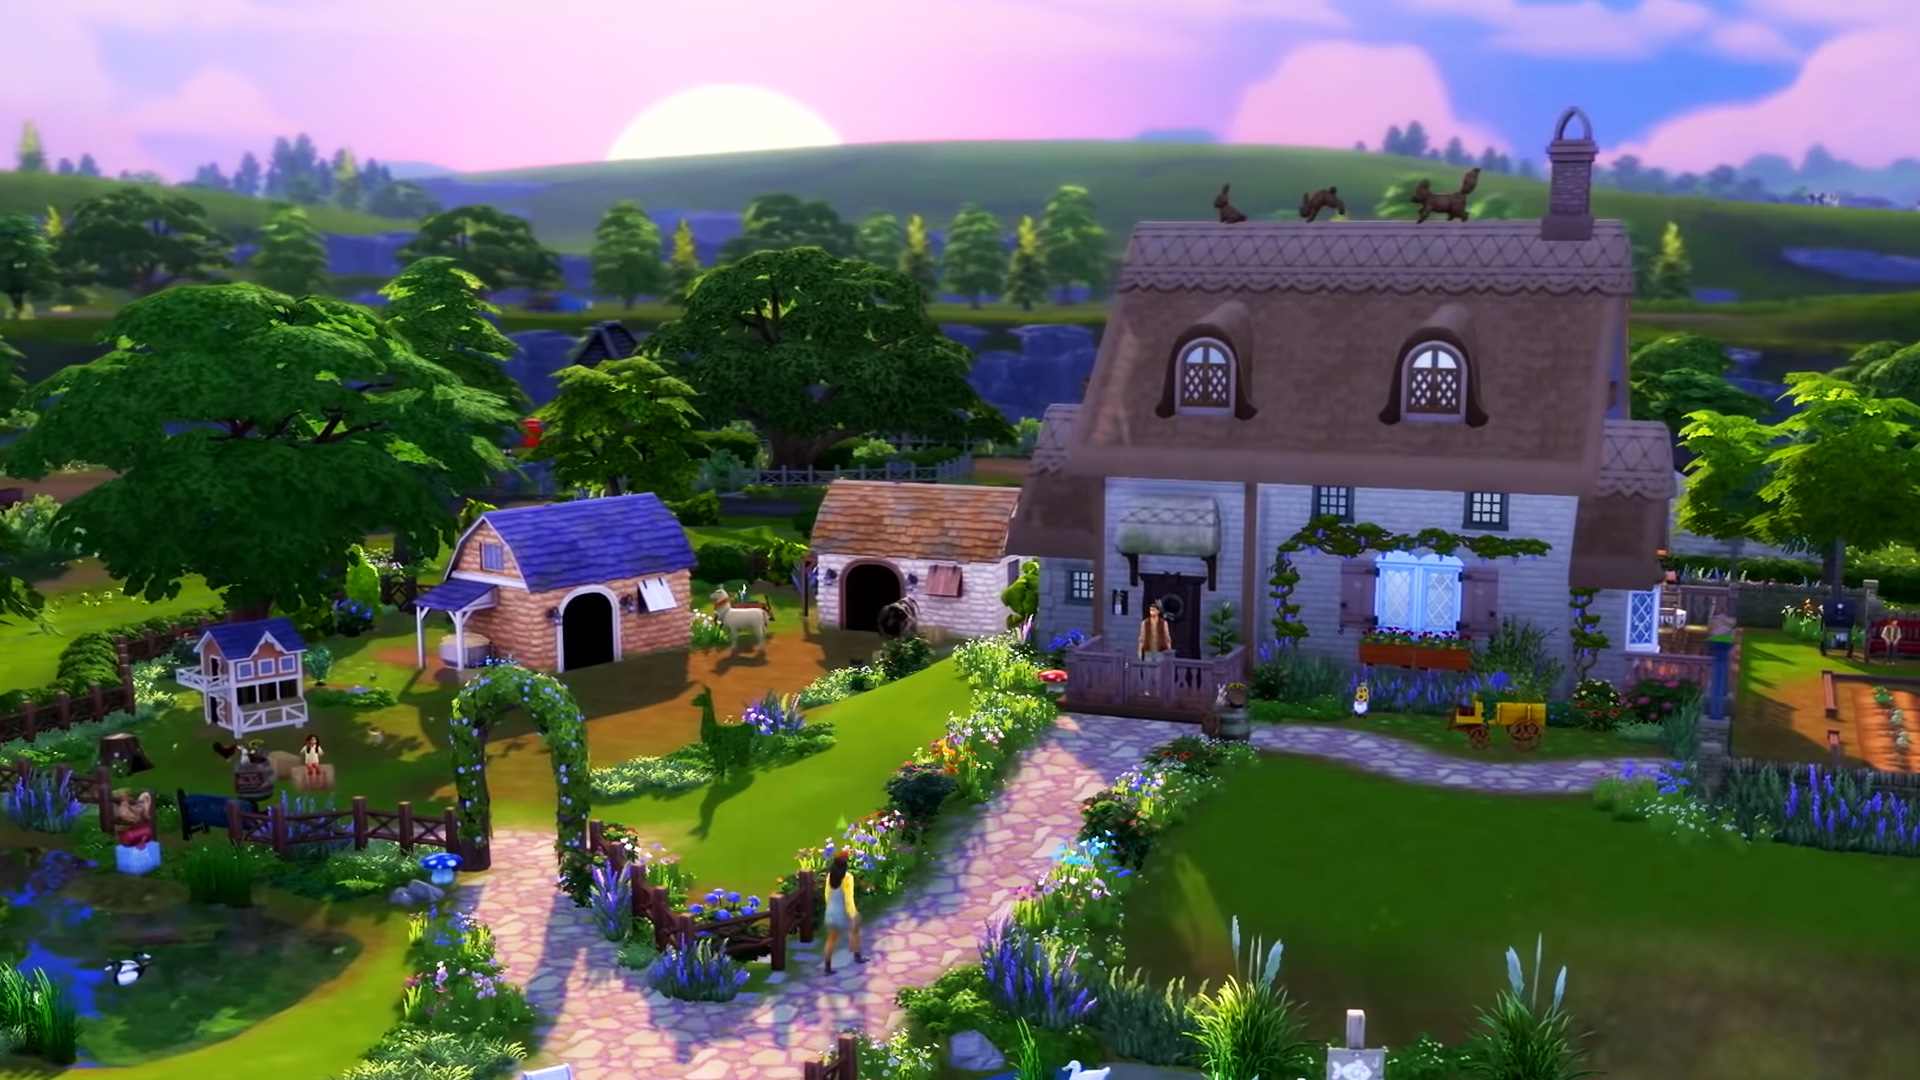 The Sims 4 Cottage Living release date, trailer, and gameplay